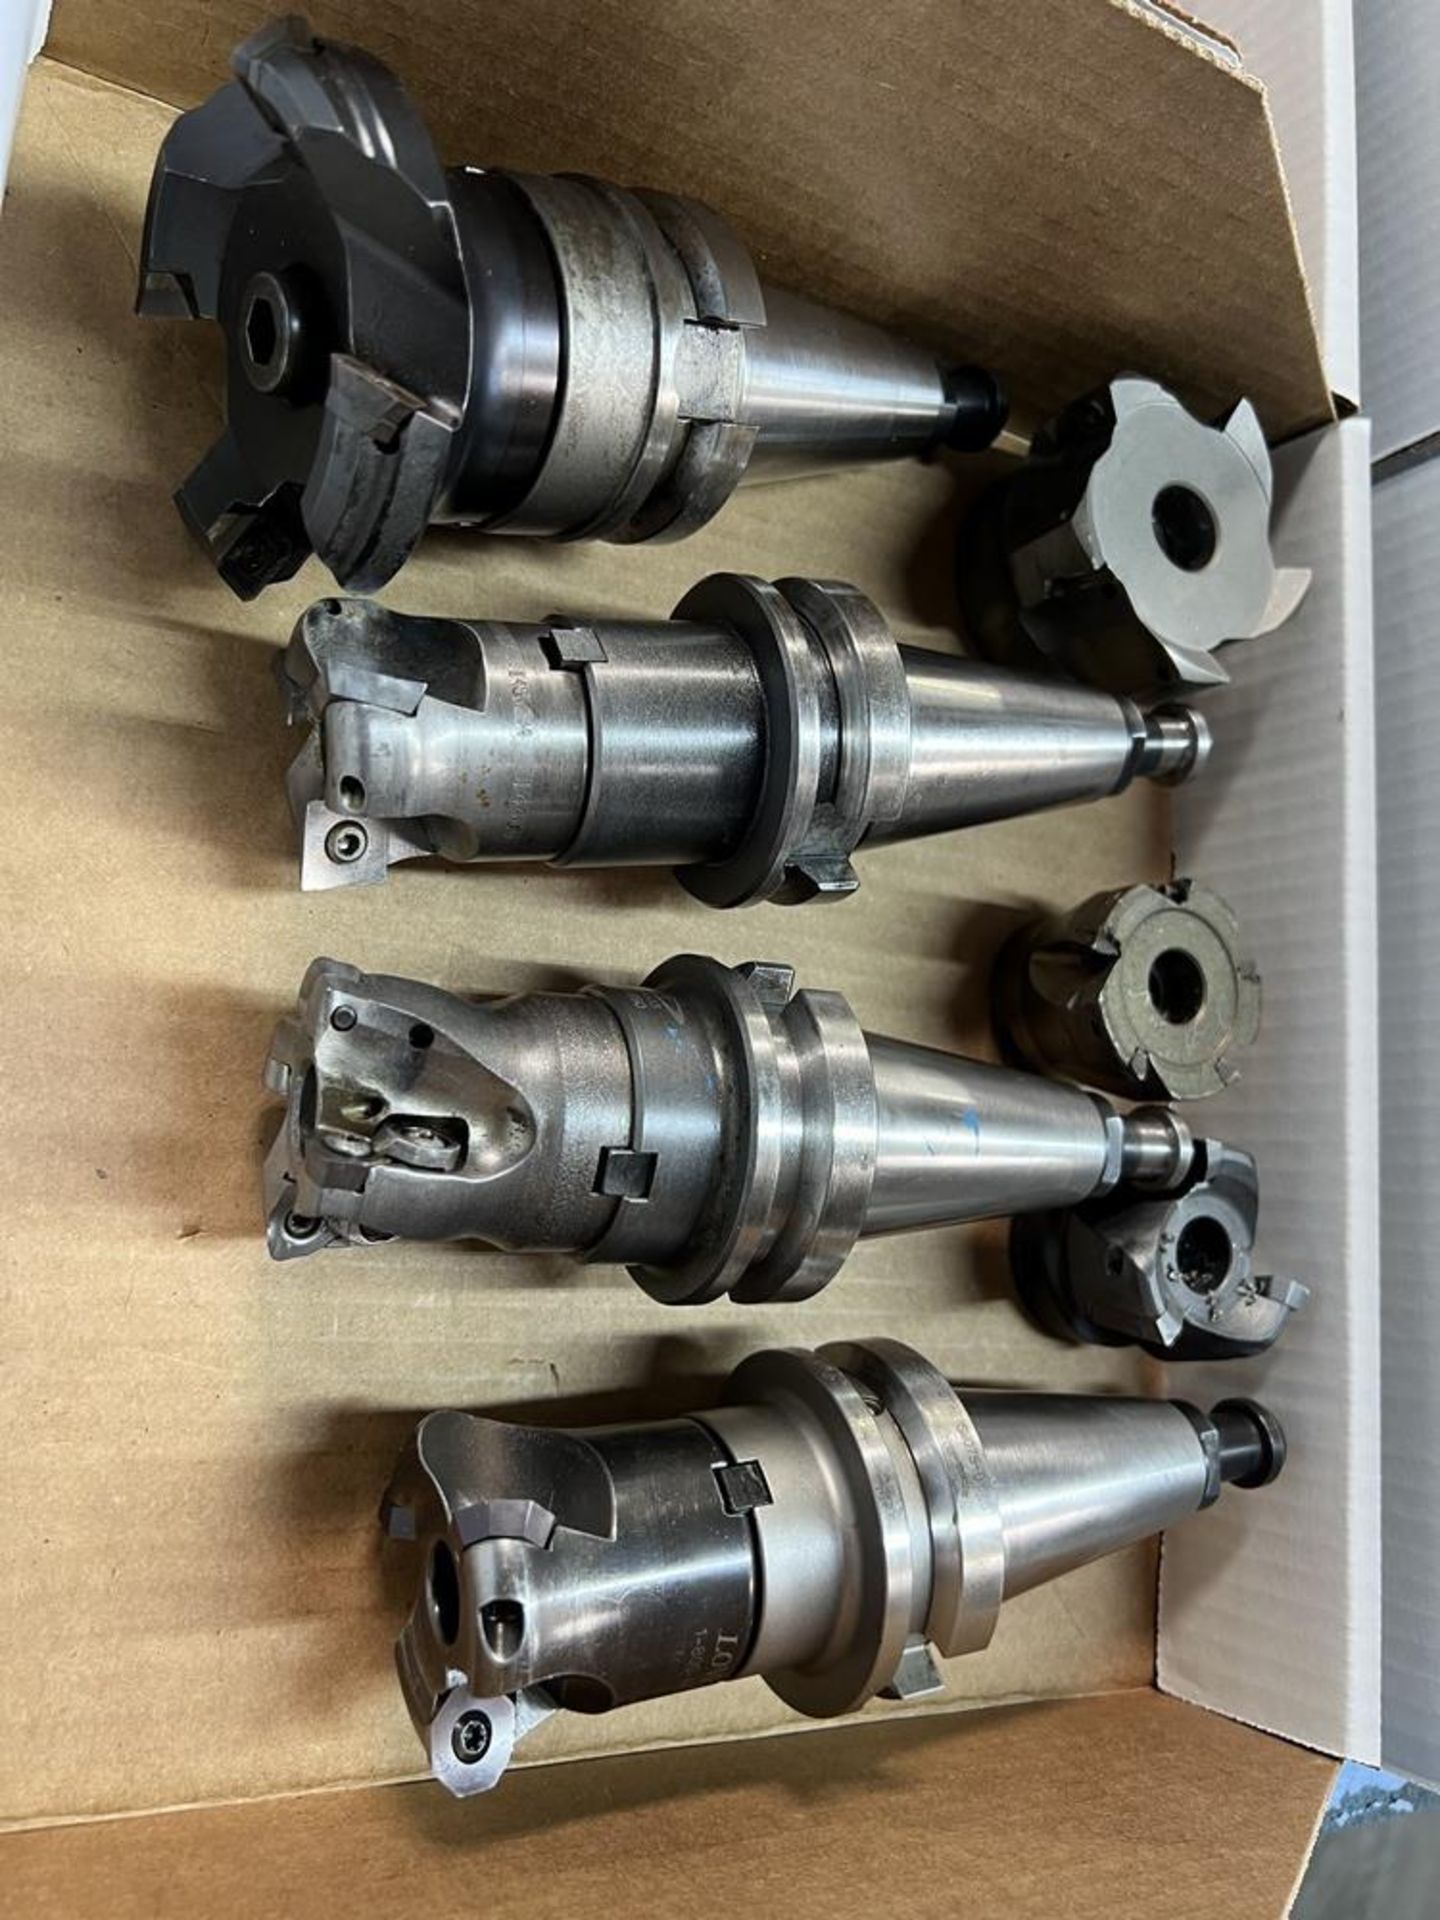 (4) BT-40 Shell Mill Holders With Tooling